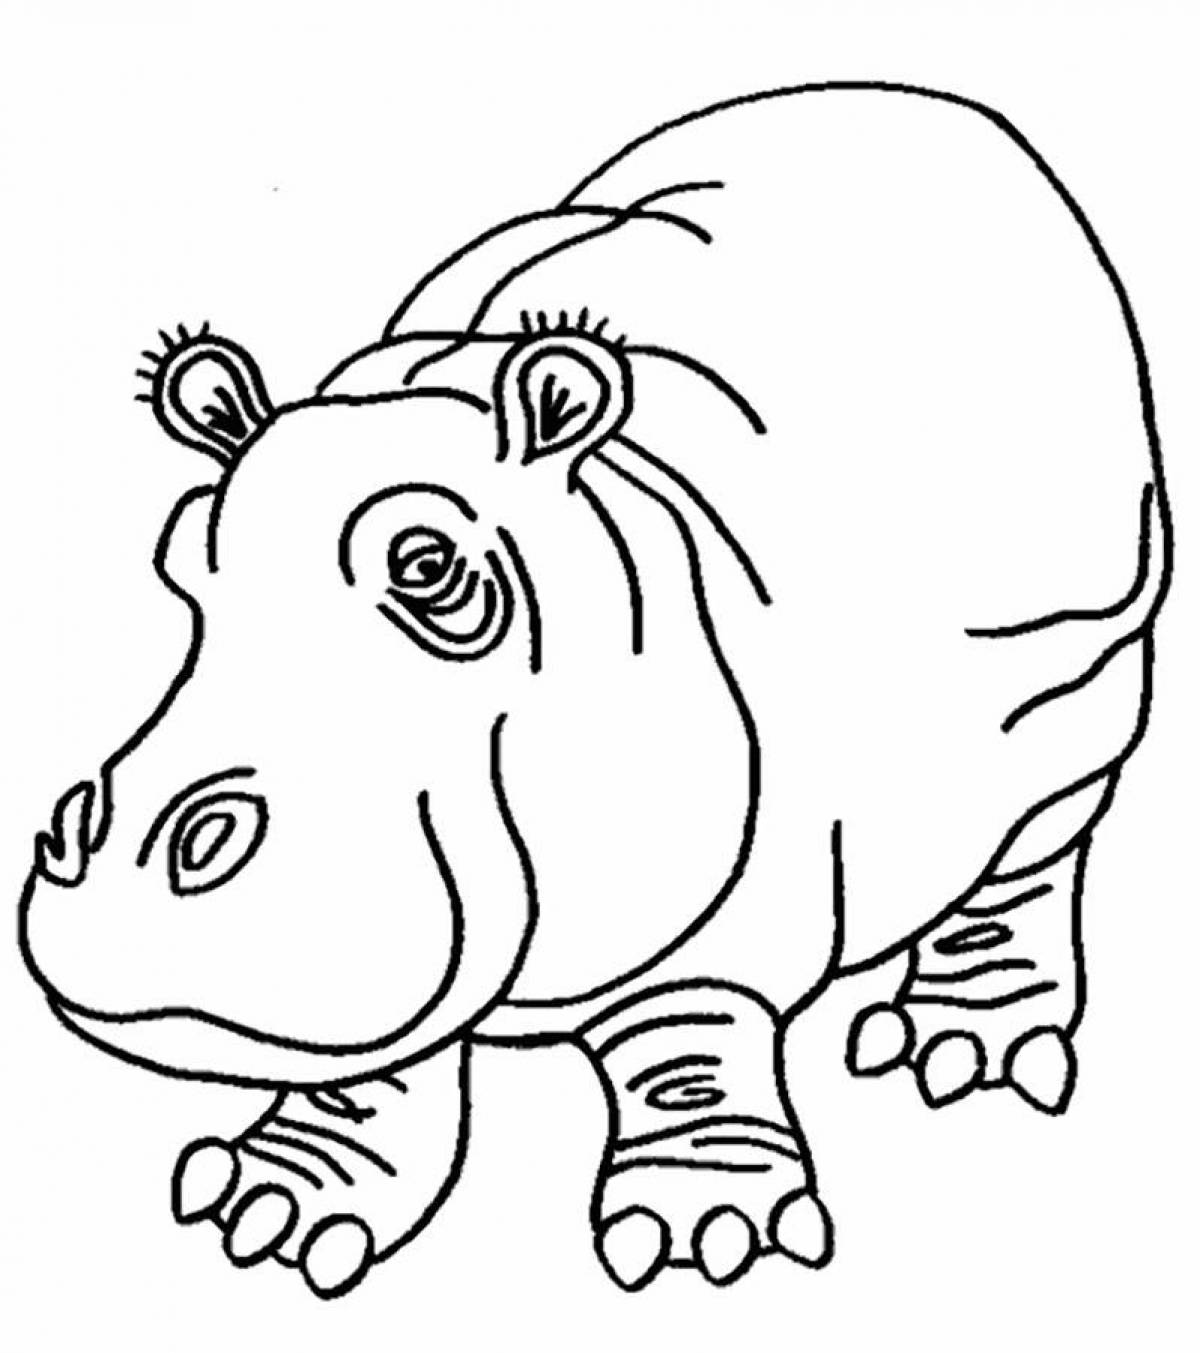 Adorable hippo coloring book for kids